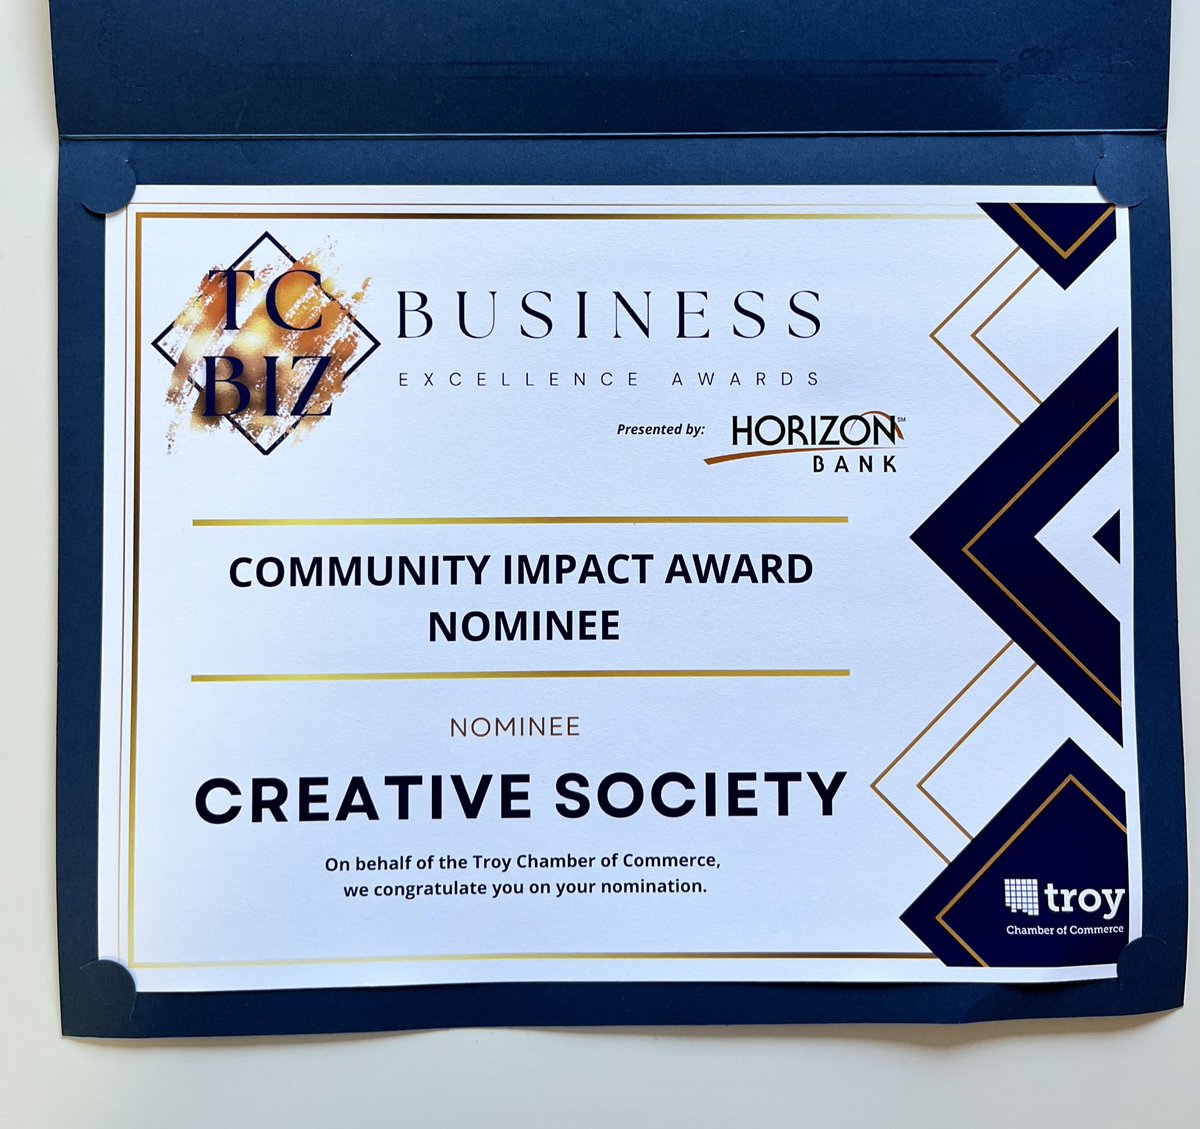 🌸Bringing together people and communities holds immense value. We're thrilled to be a part of this incredible community, recognizing that change starts with each of us. #CommunityUnity #ChangeStartsWithUs #BusinessGrowth #CommunitySupport #michigan